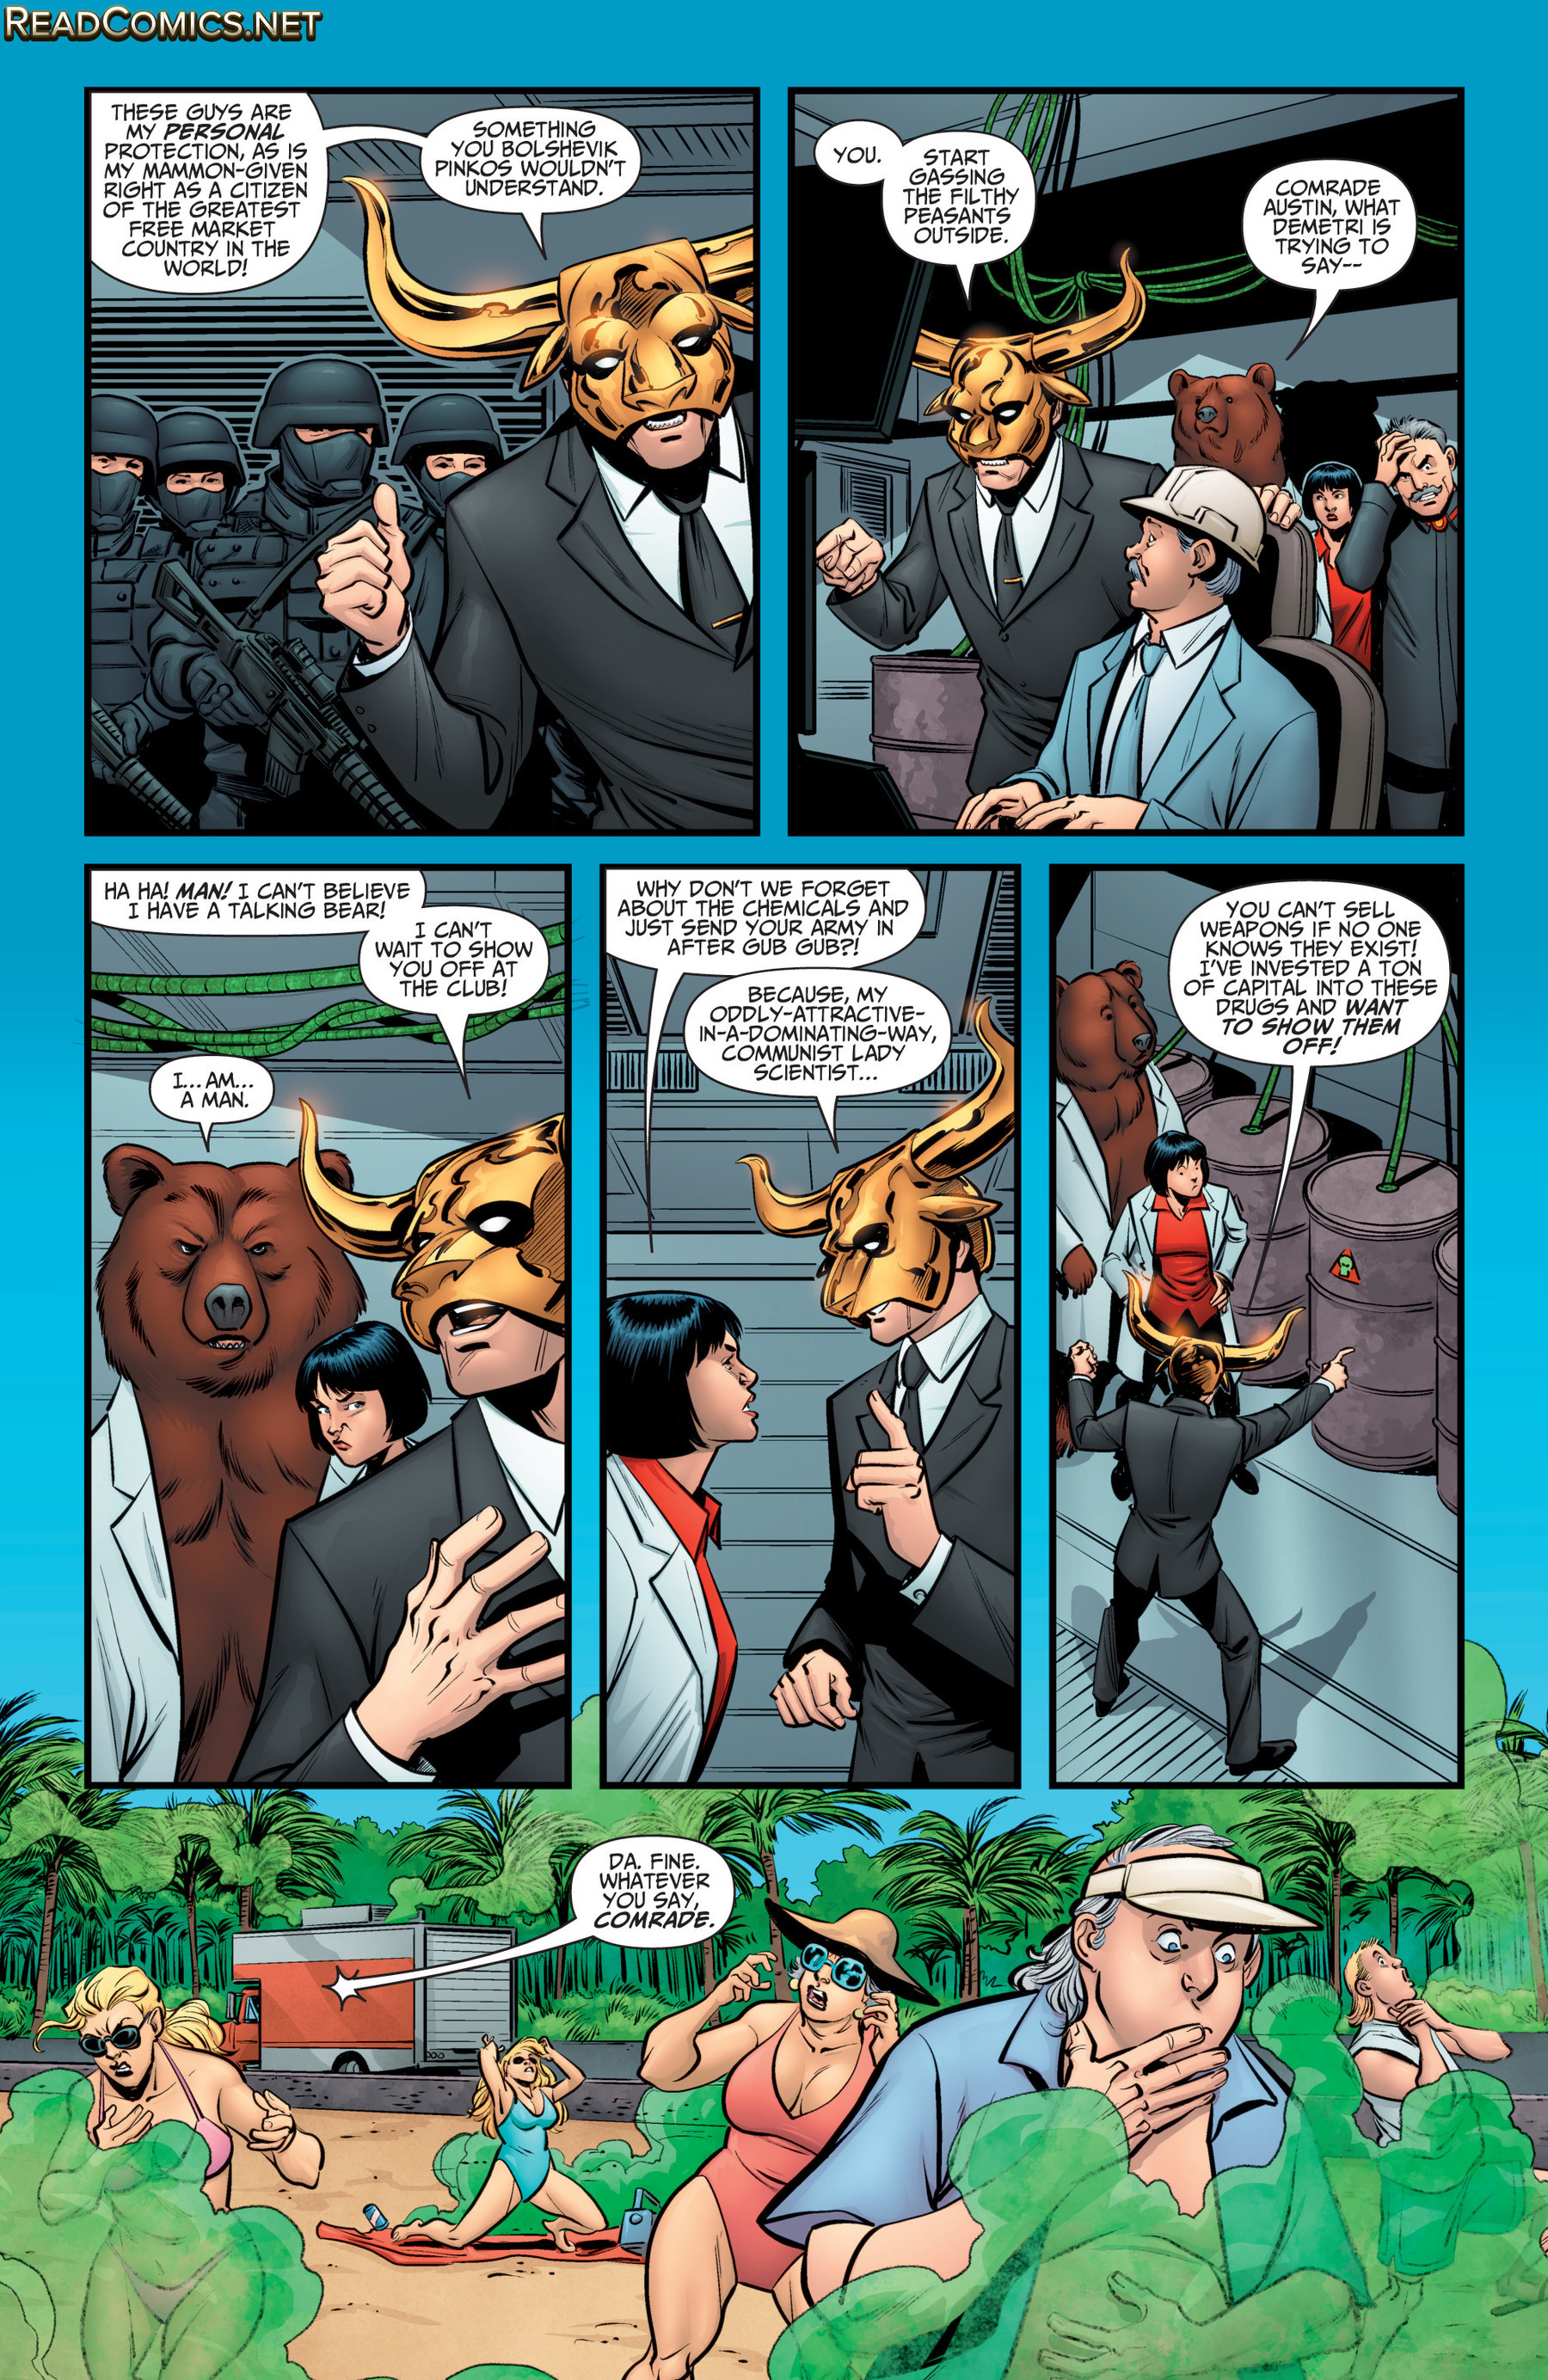 A&A - The Adventures of Archer & Armstrong (2016-): Chapter 10 - Page 4